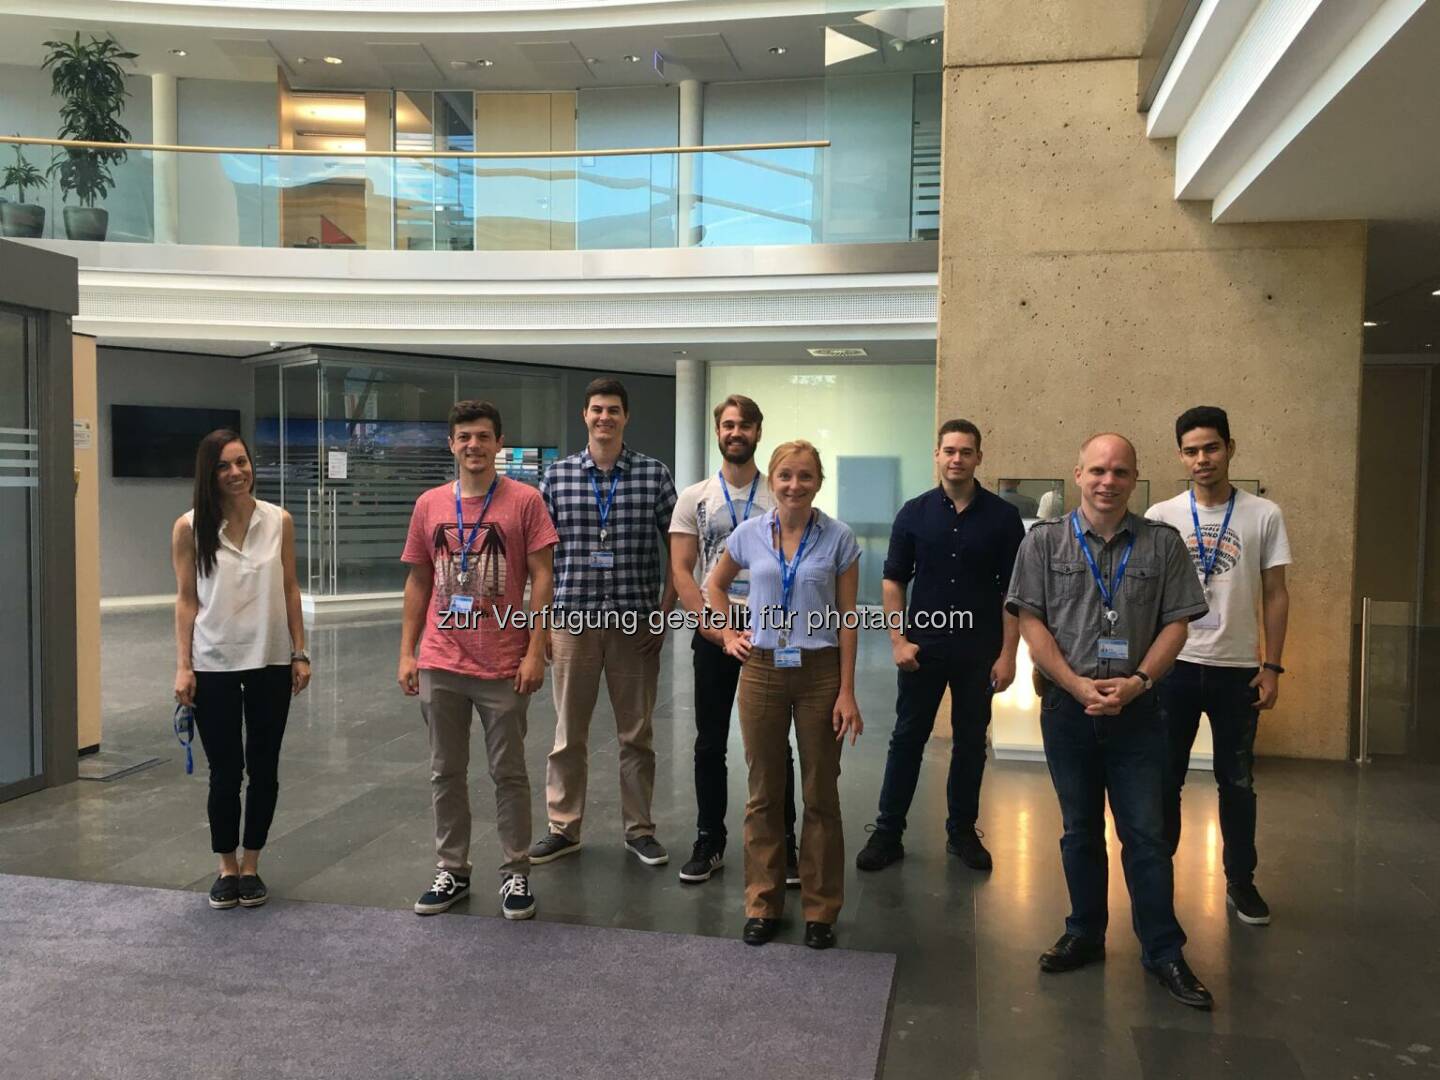 After a few months of virtual onboarding meetings we are happy to welcome our newest Frequentis members personally in our Welcome Workshop - we are glad to have you here! #staypositive  #doyourlifesbestwork #frequentis  Source: http://facebook.com/Frequentis